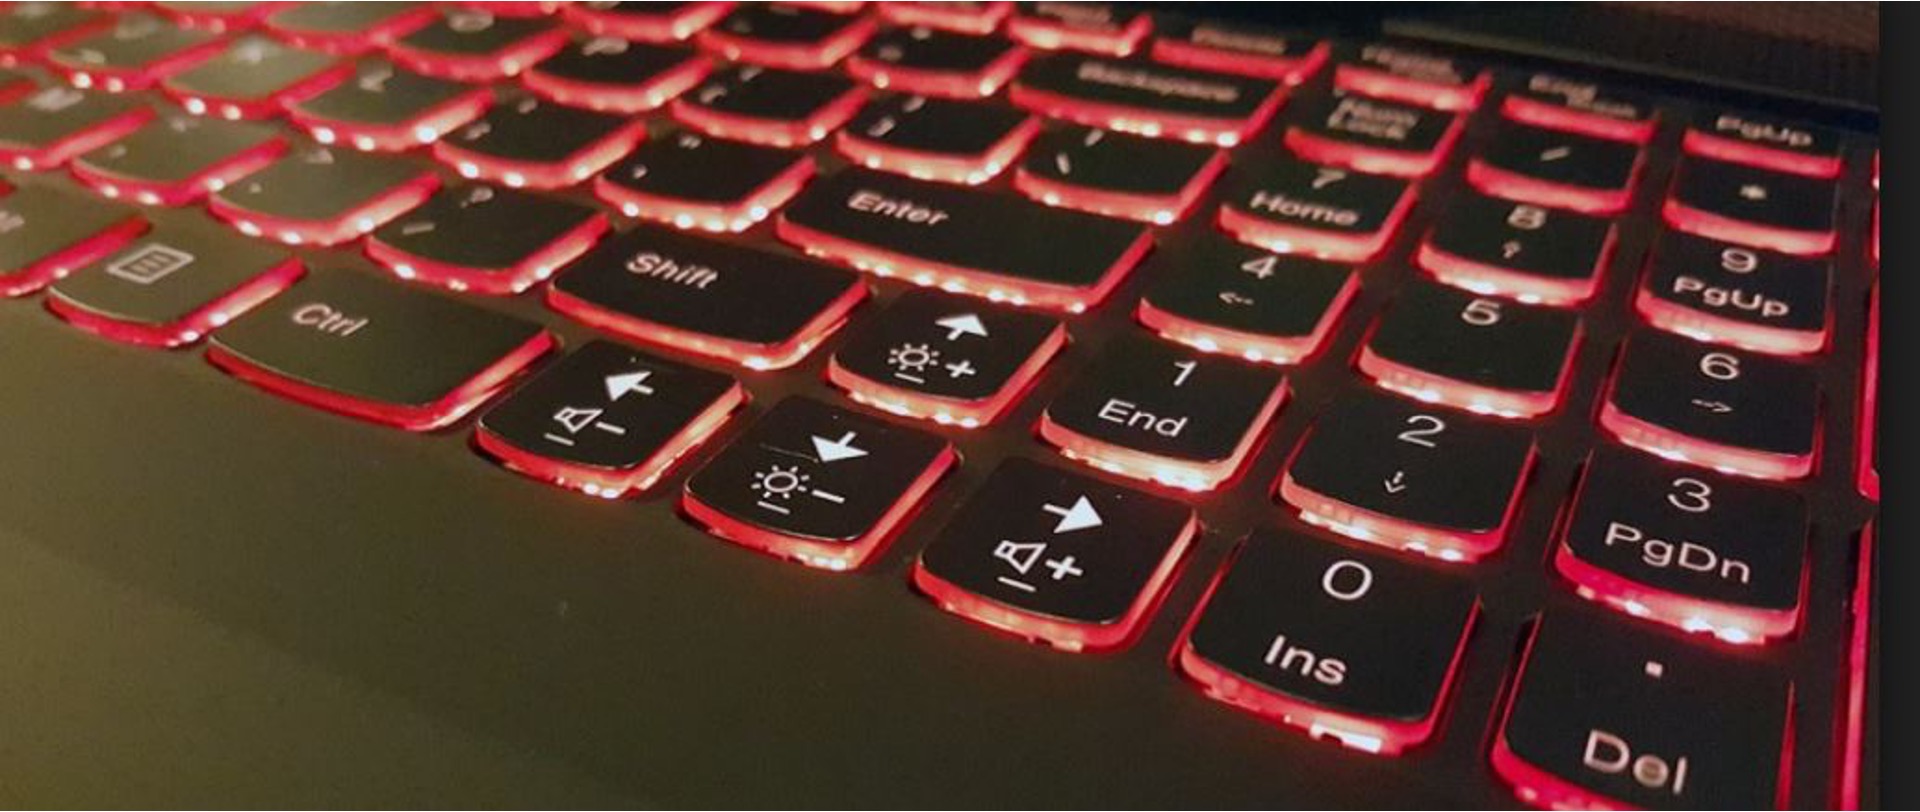 How To Turn Off Gaming Keyboard Light